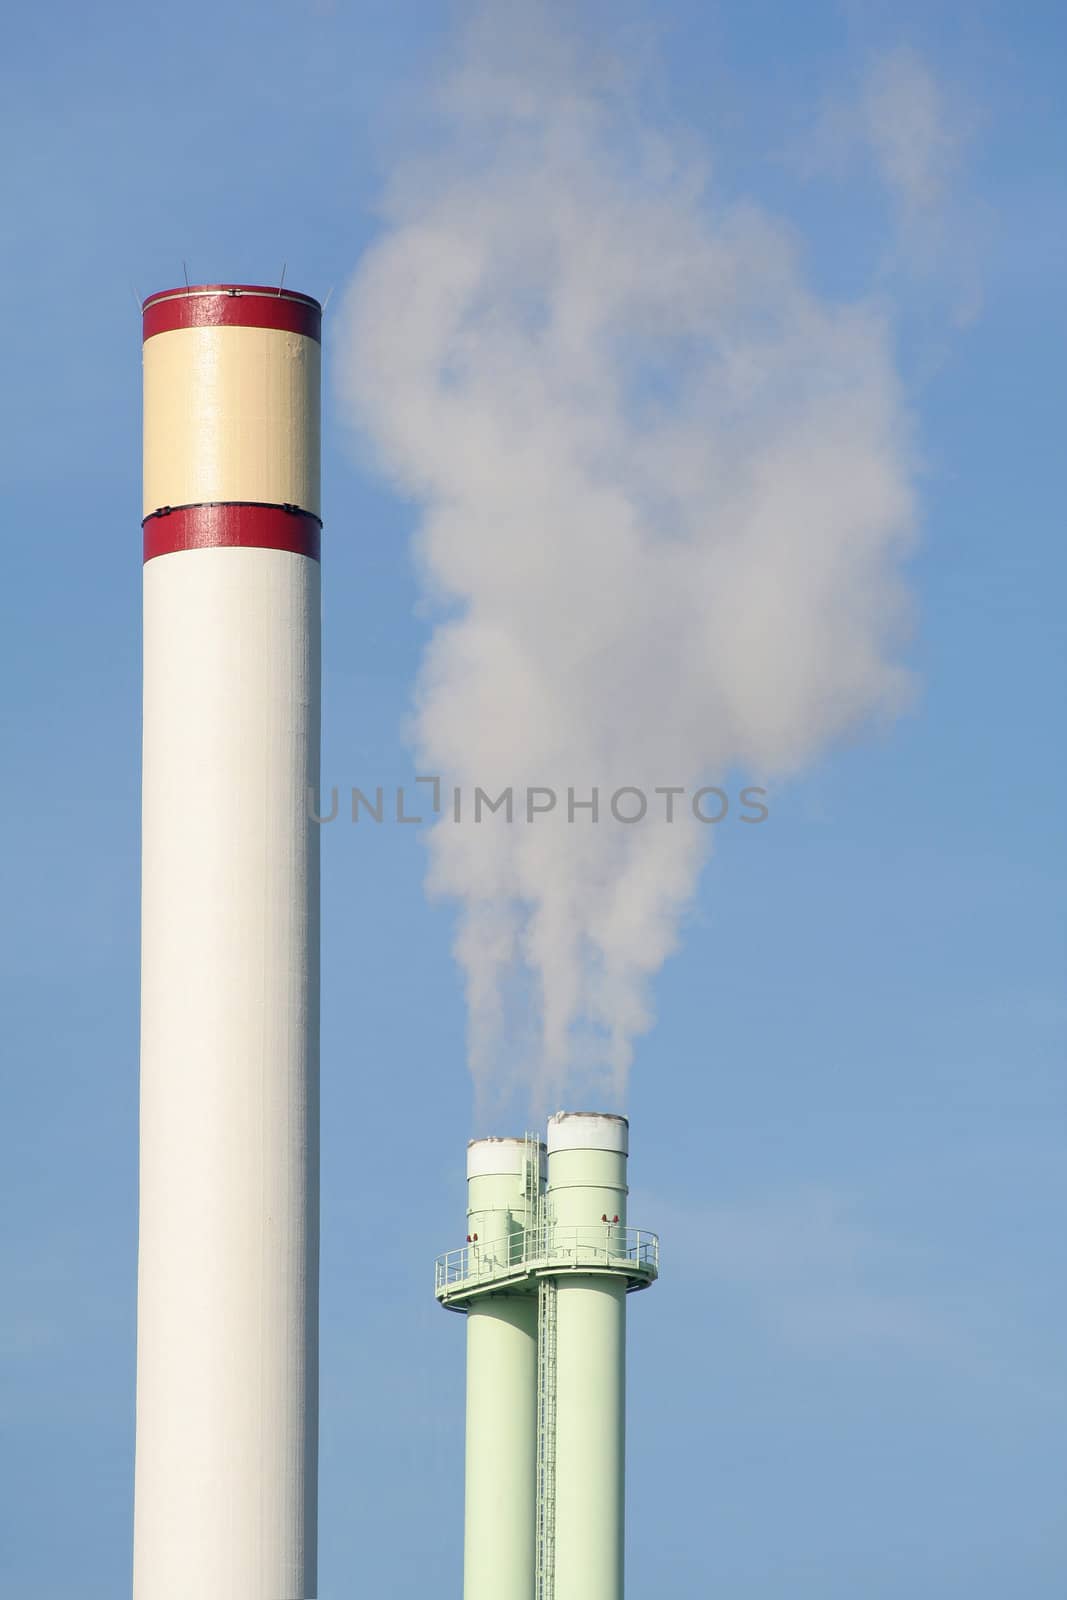 Two smoke stacks of an incinerating plant. Beautiful colours.